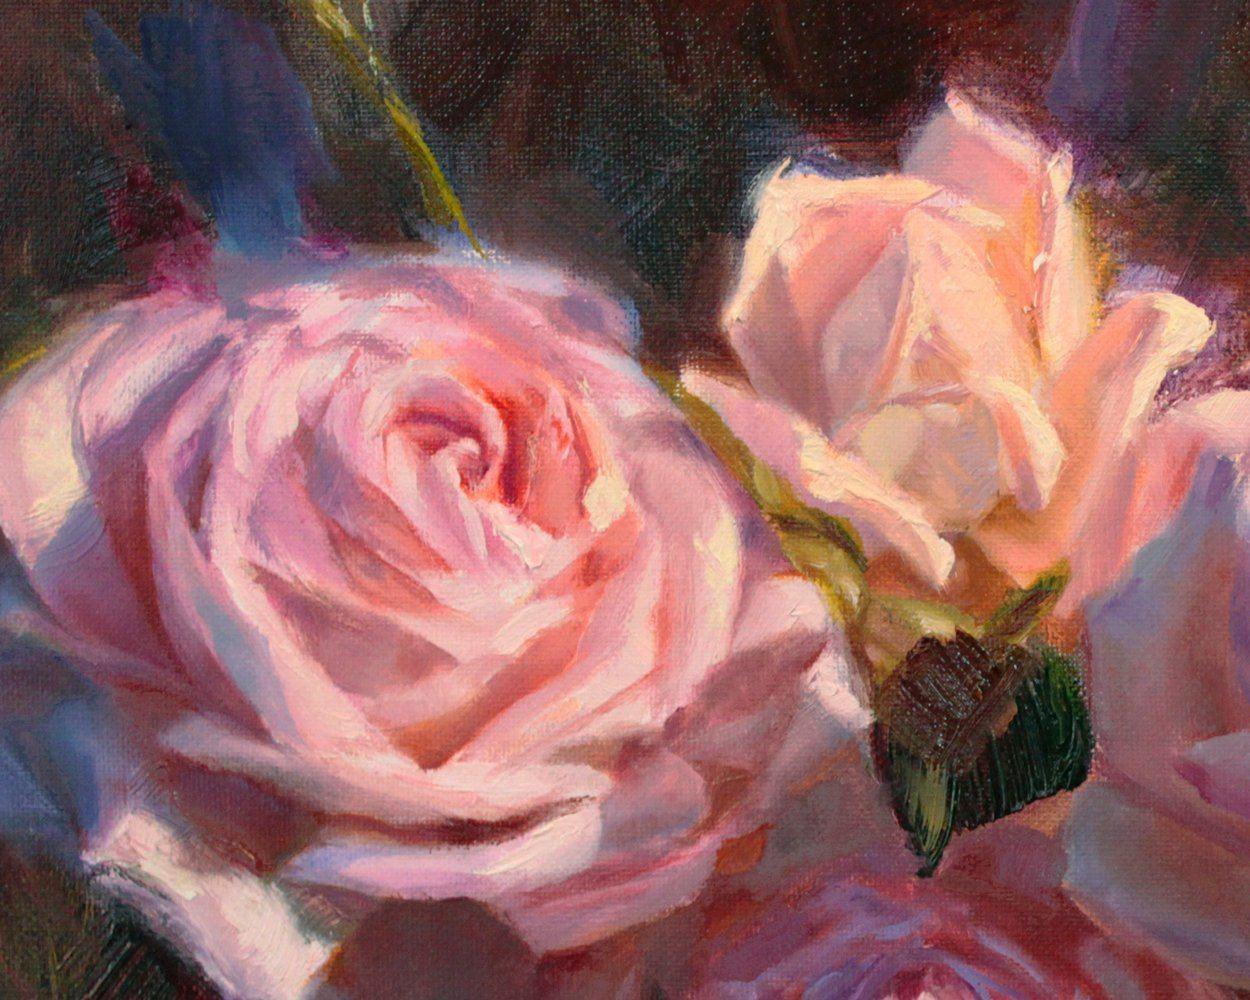 English Roses Wall Art Print of Pink Flowers by Floral Artist Karen Whitworth